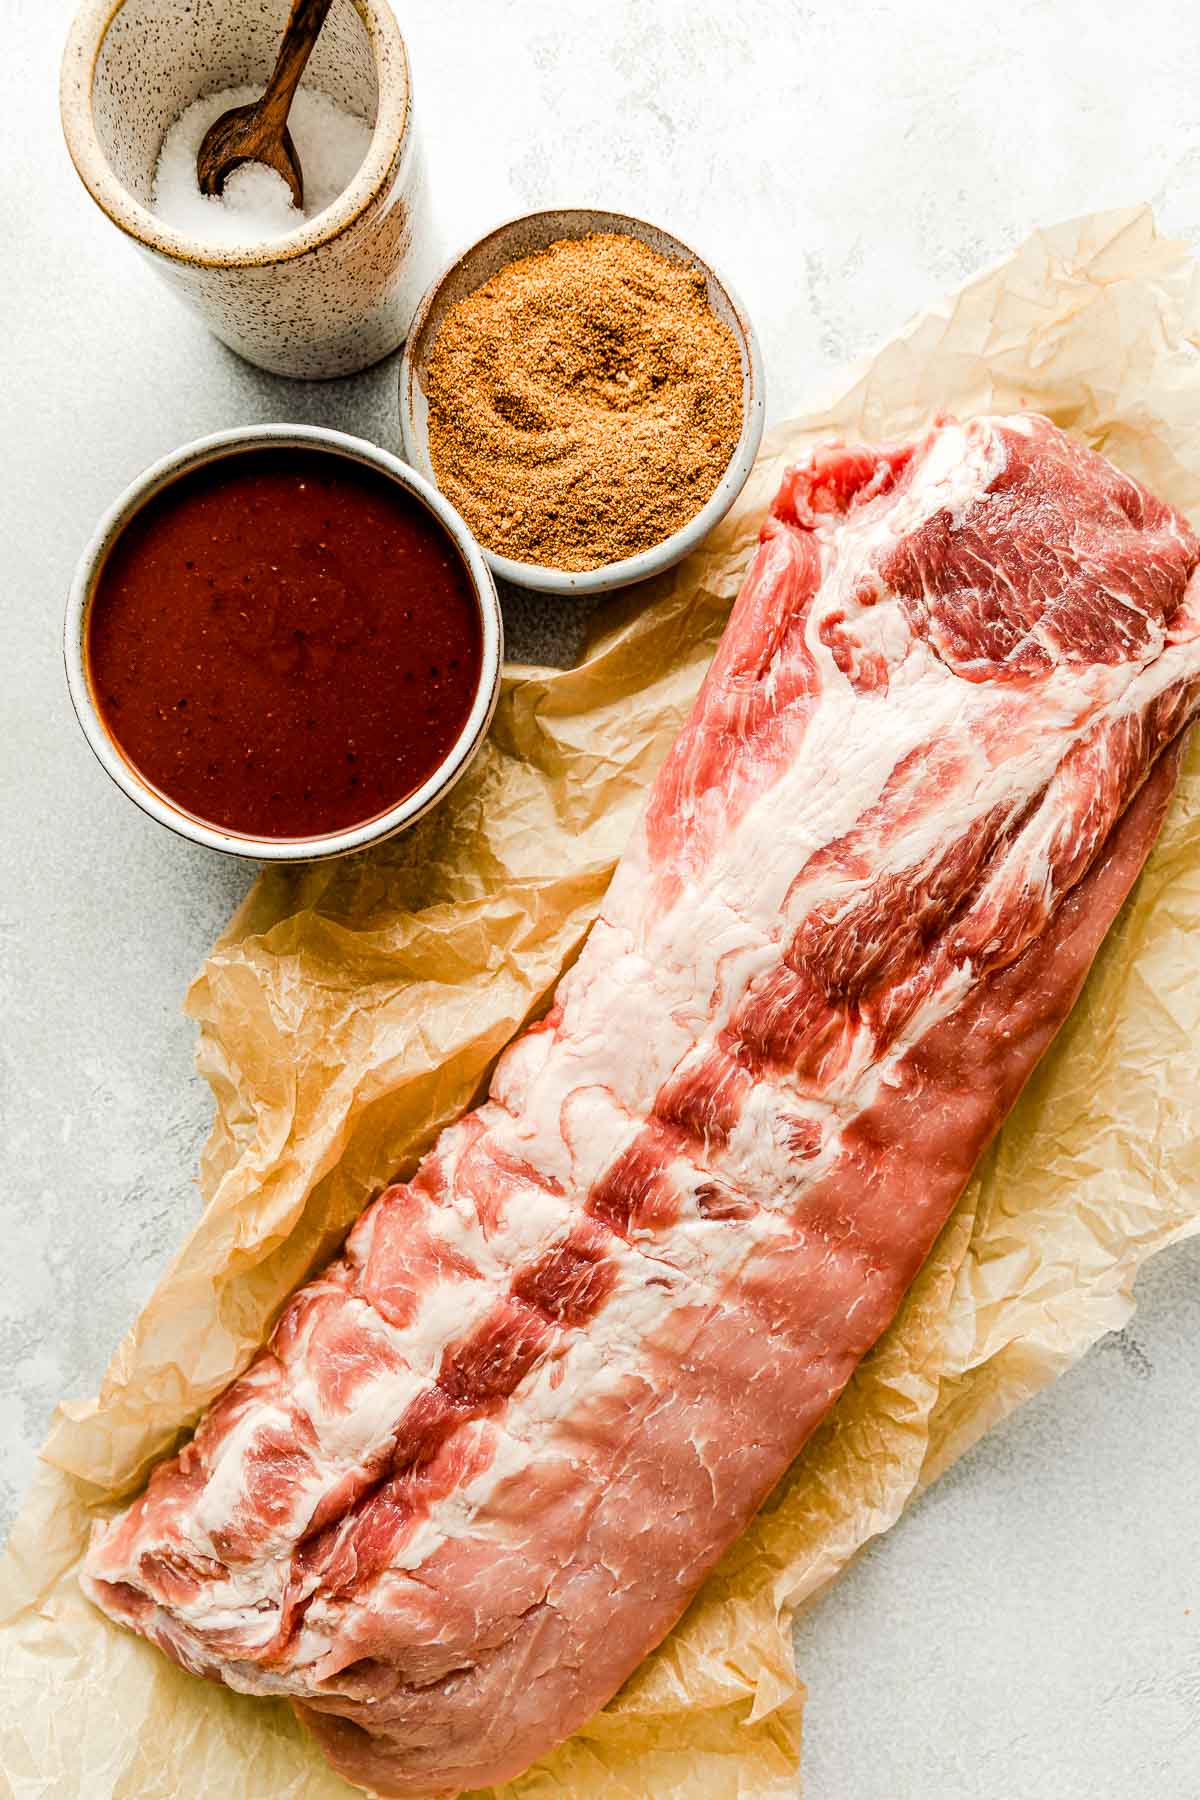 Grilled baby back ribs ingredients sit atop a white marbled surface: dry rub, A macro close-up shot from the side of charred baby back ribs on the grill, being brushed with BBQ sauce. sauce, kosher salt & baby back ribs,